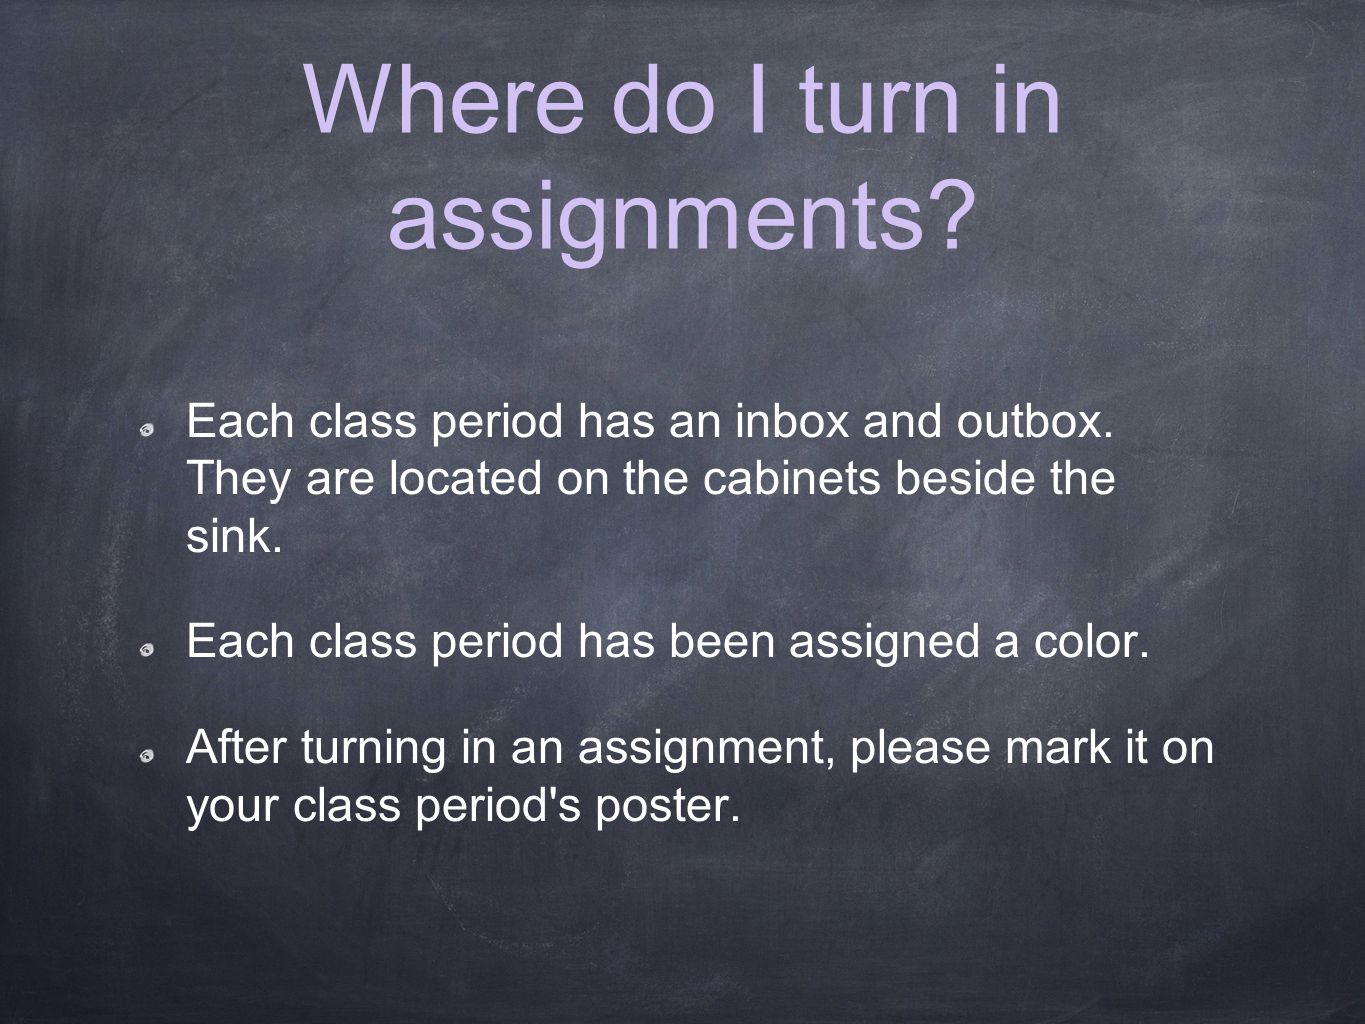 Where do I turn in assignments. Each class period has an inbox and outbox.